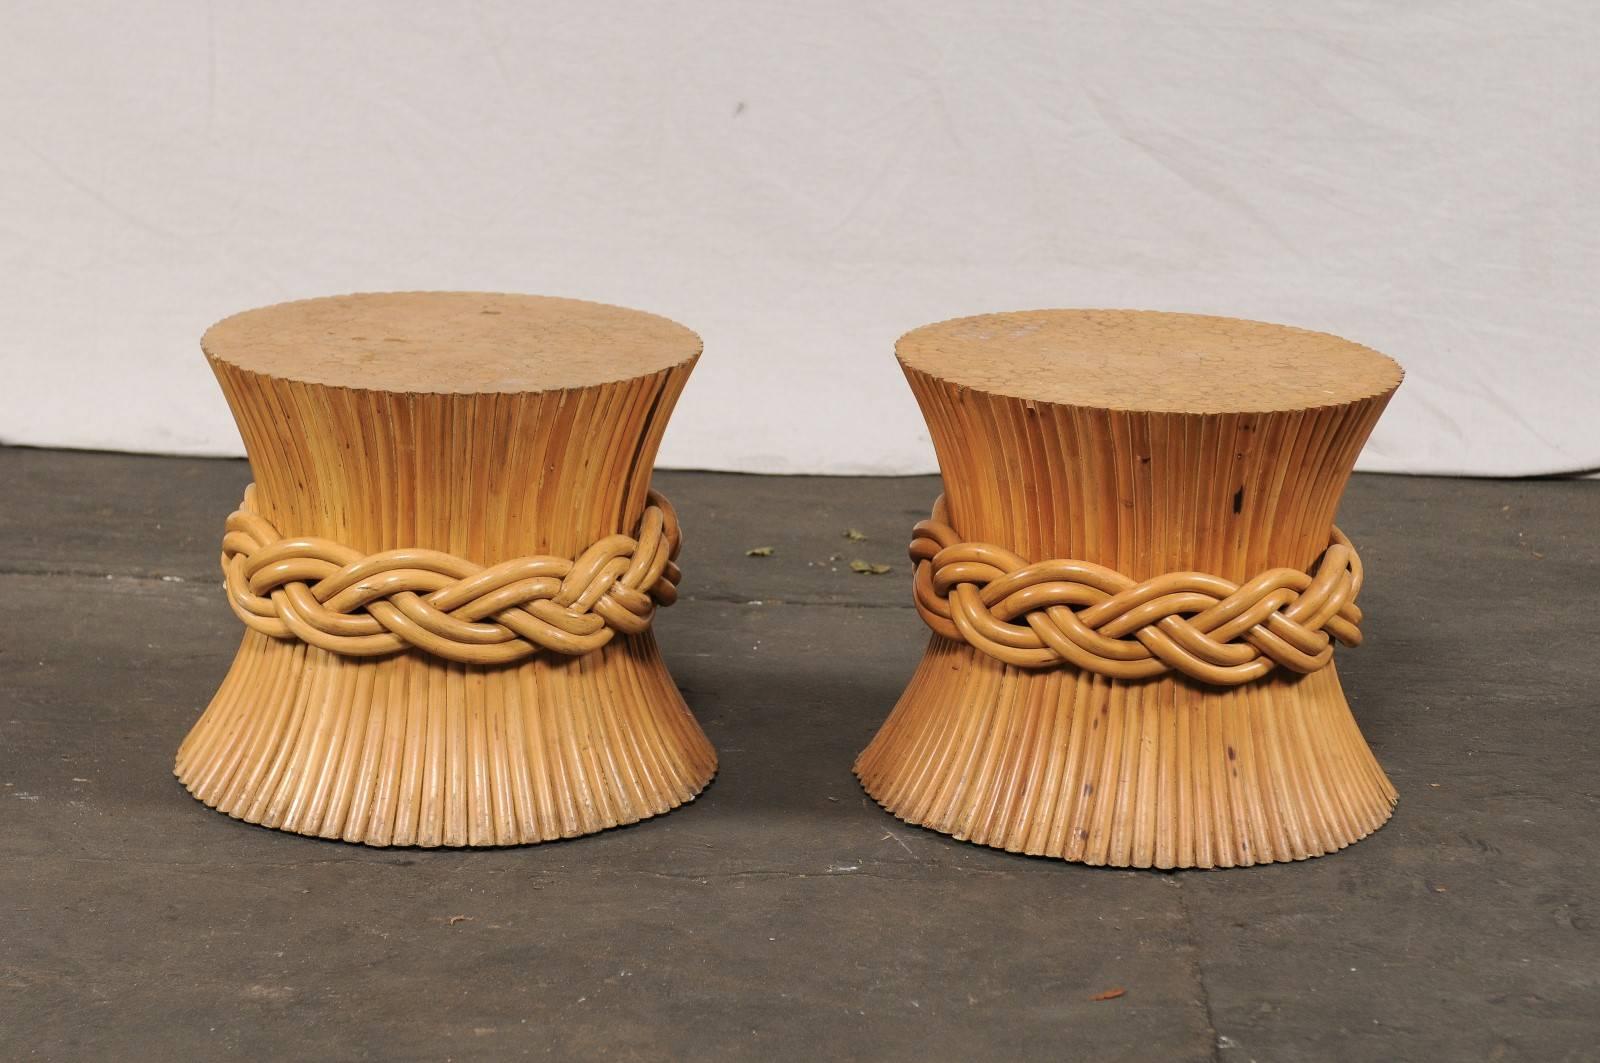 Pair of sheaf of wheat tables attributed to McGuire, circa 1970s.